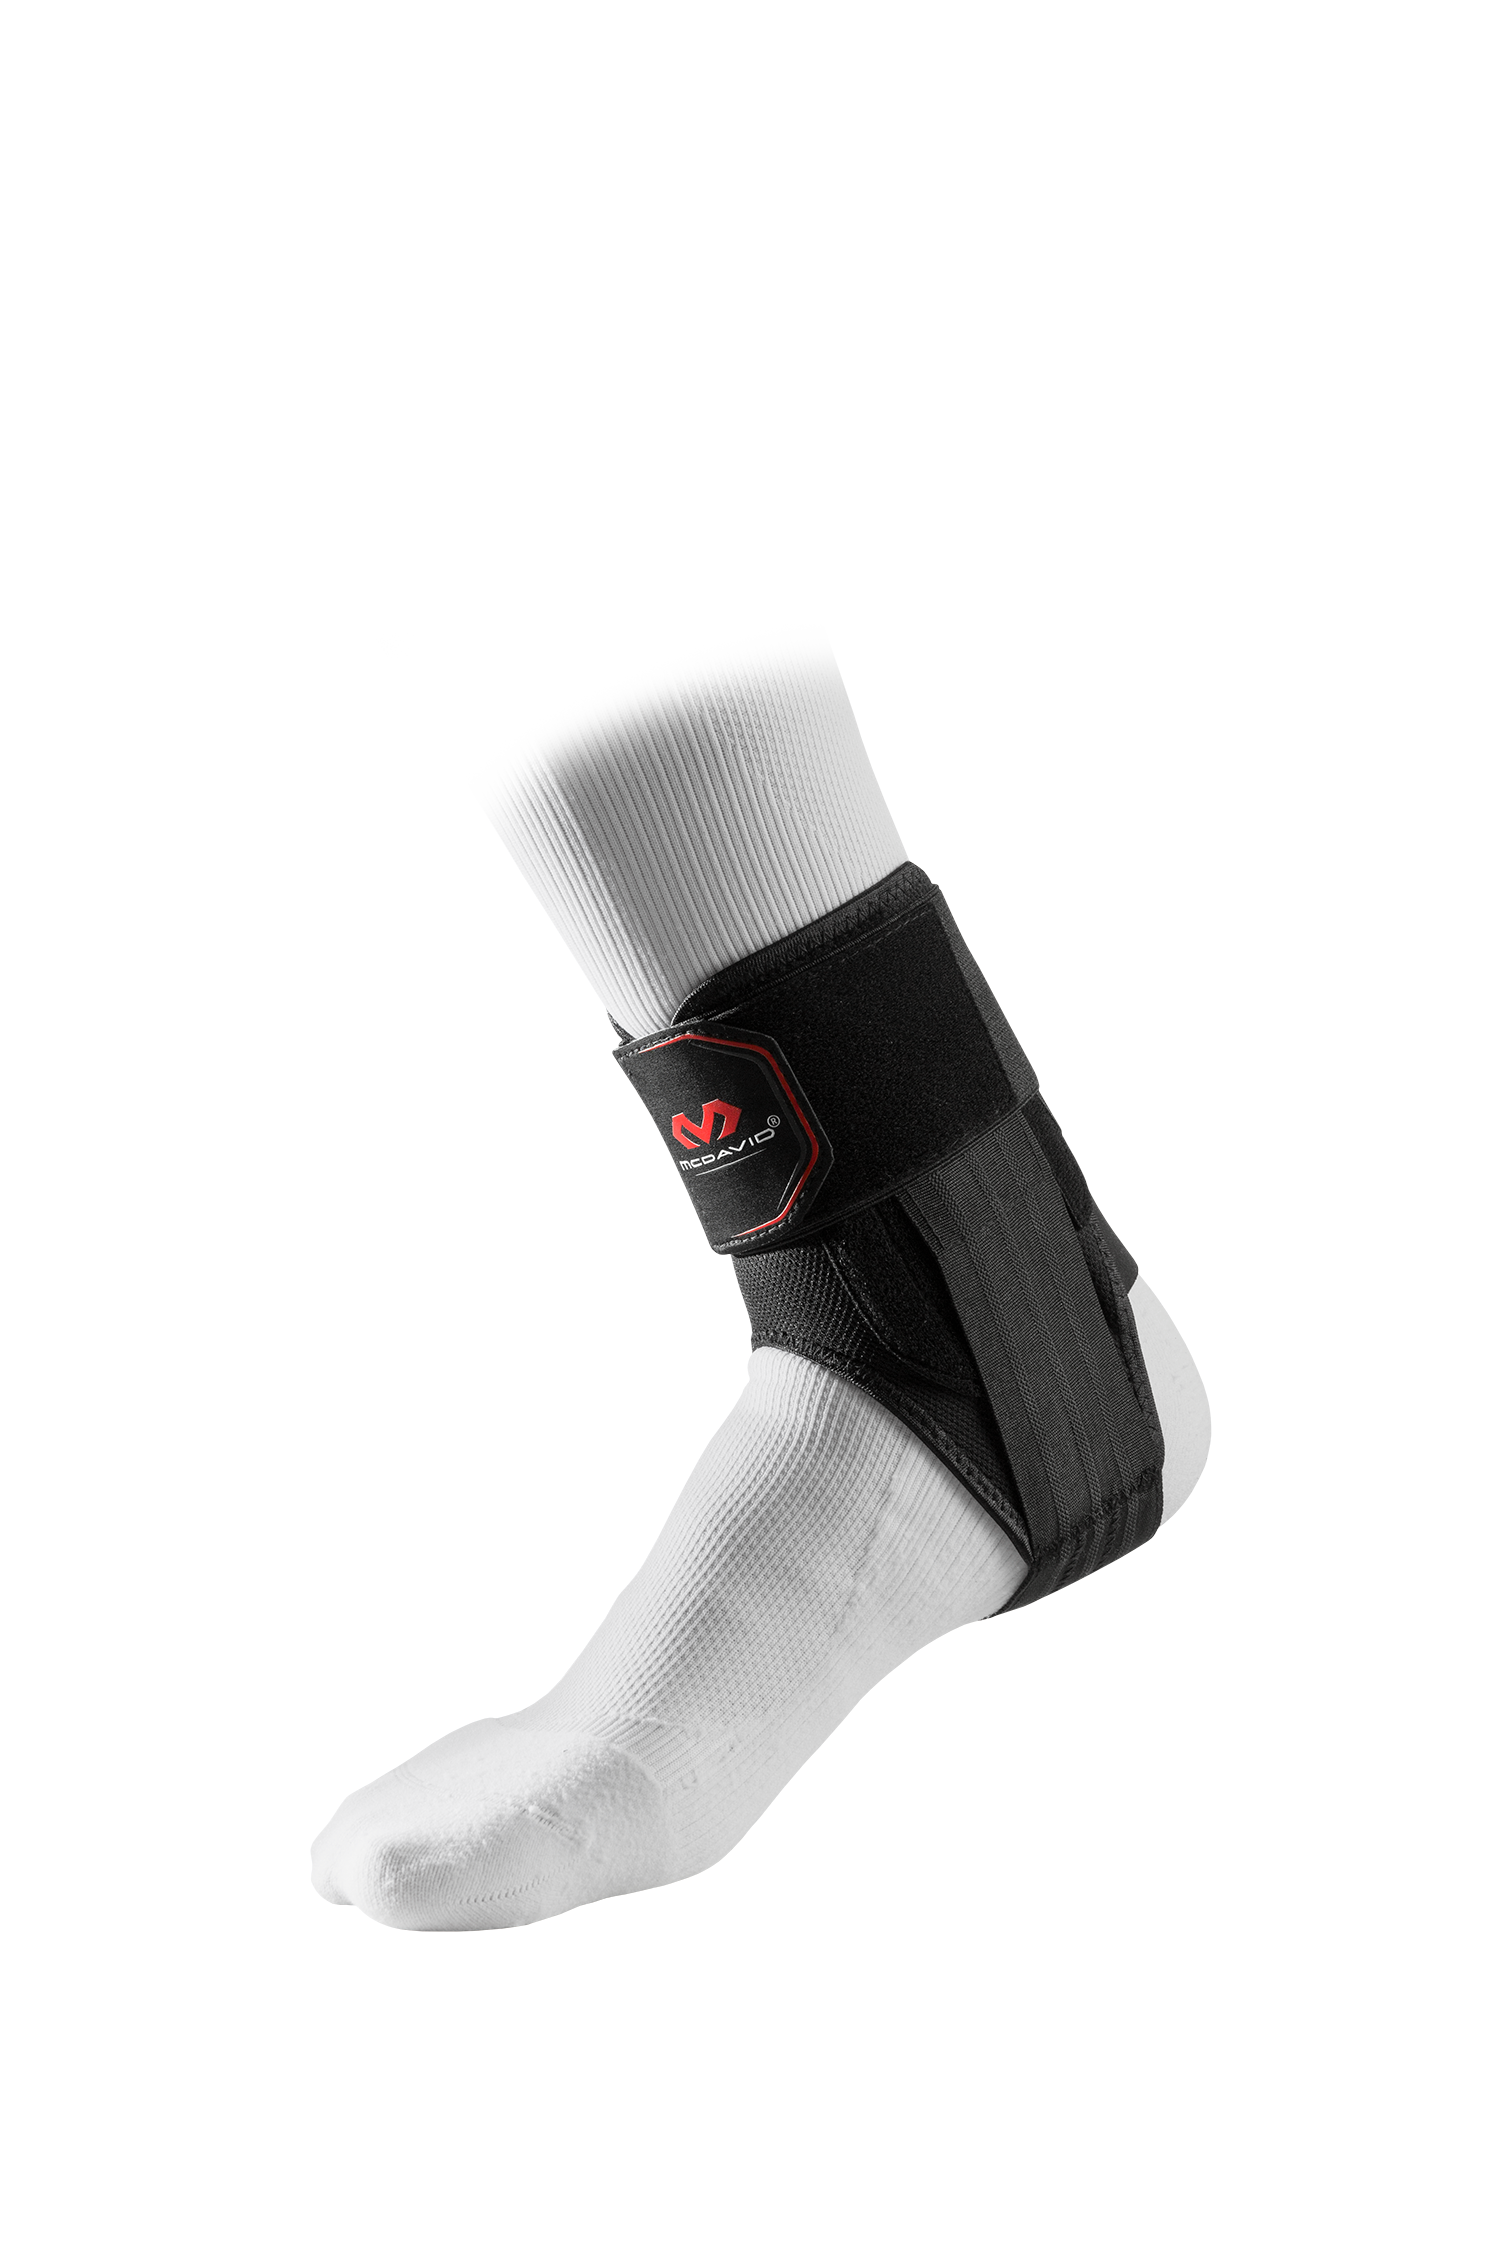 McDavid Stealth Ankle Brace with Minimal Coverage & Flex-Support Stays,  Assorted Sizes